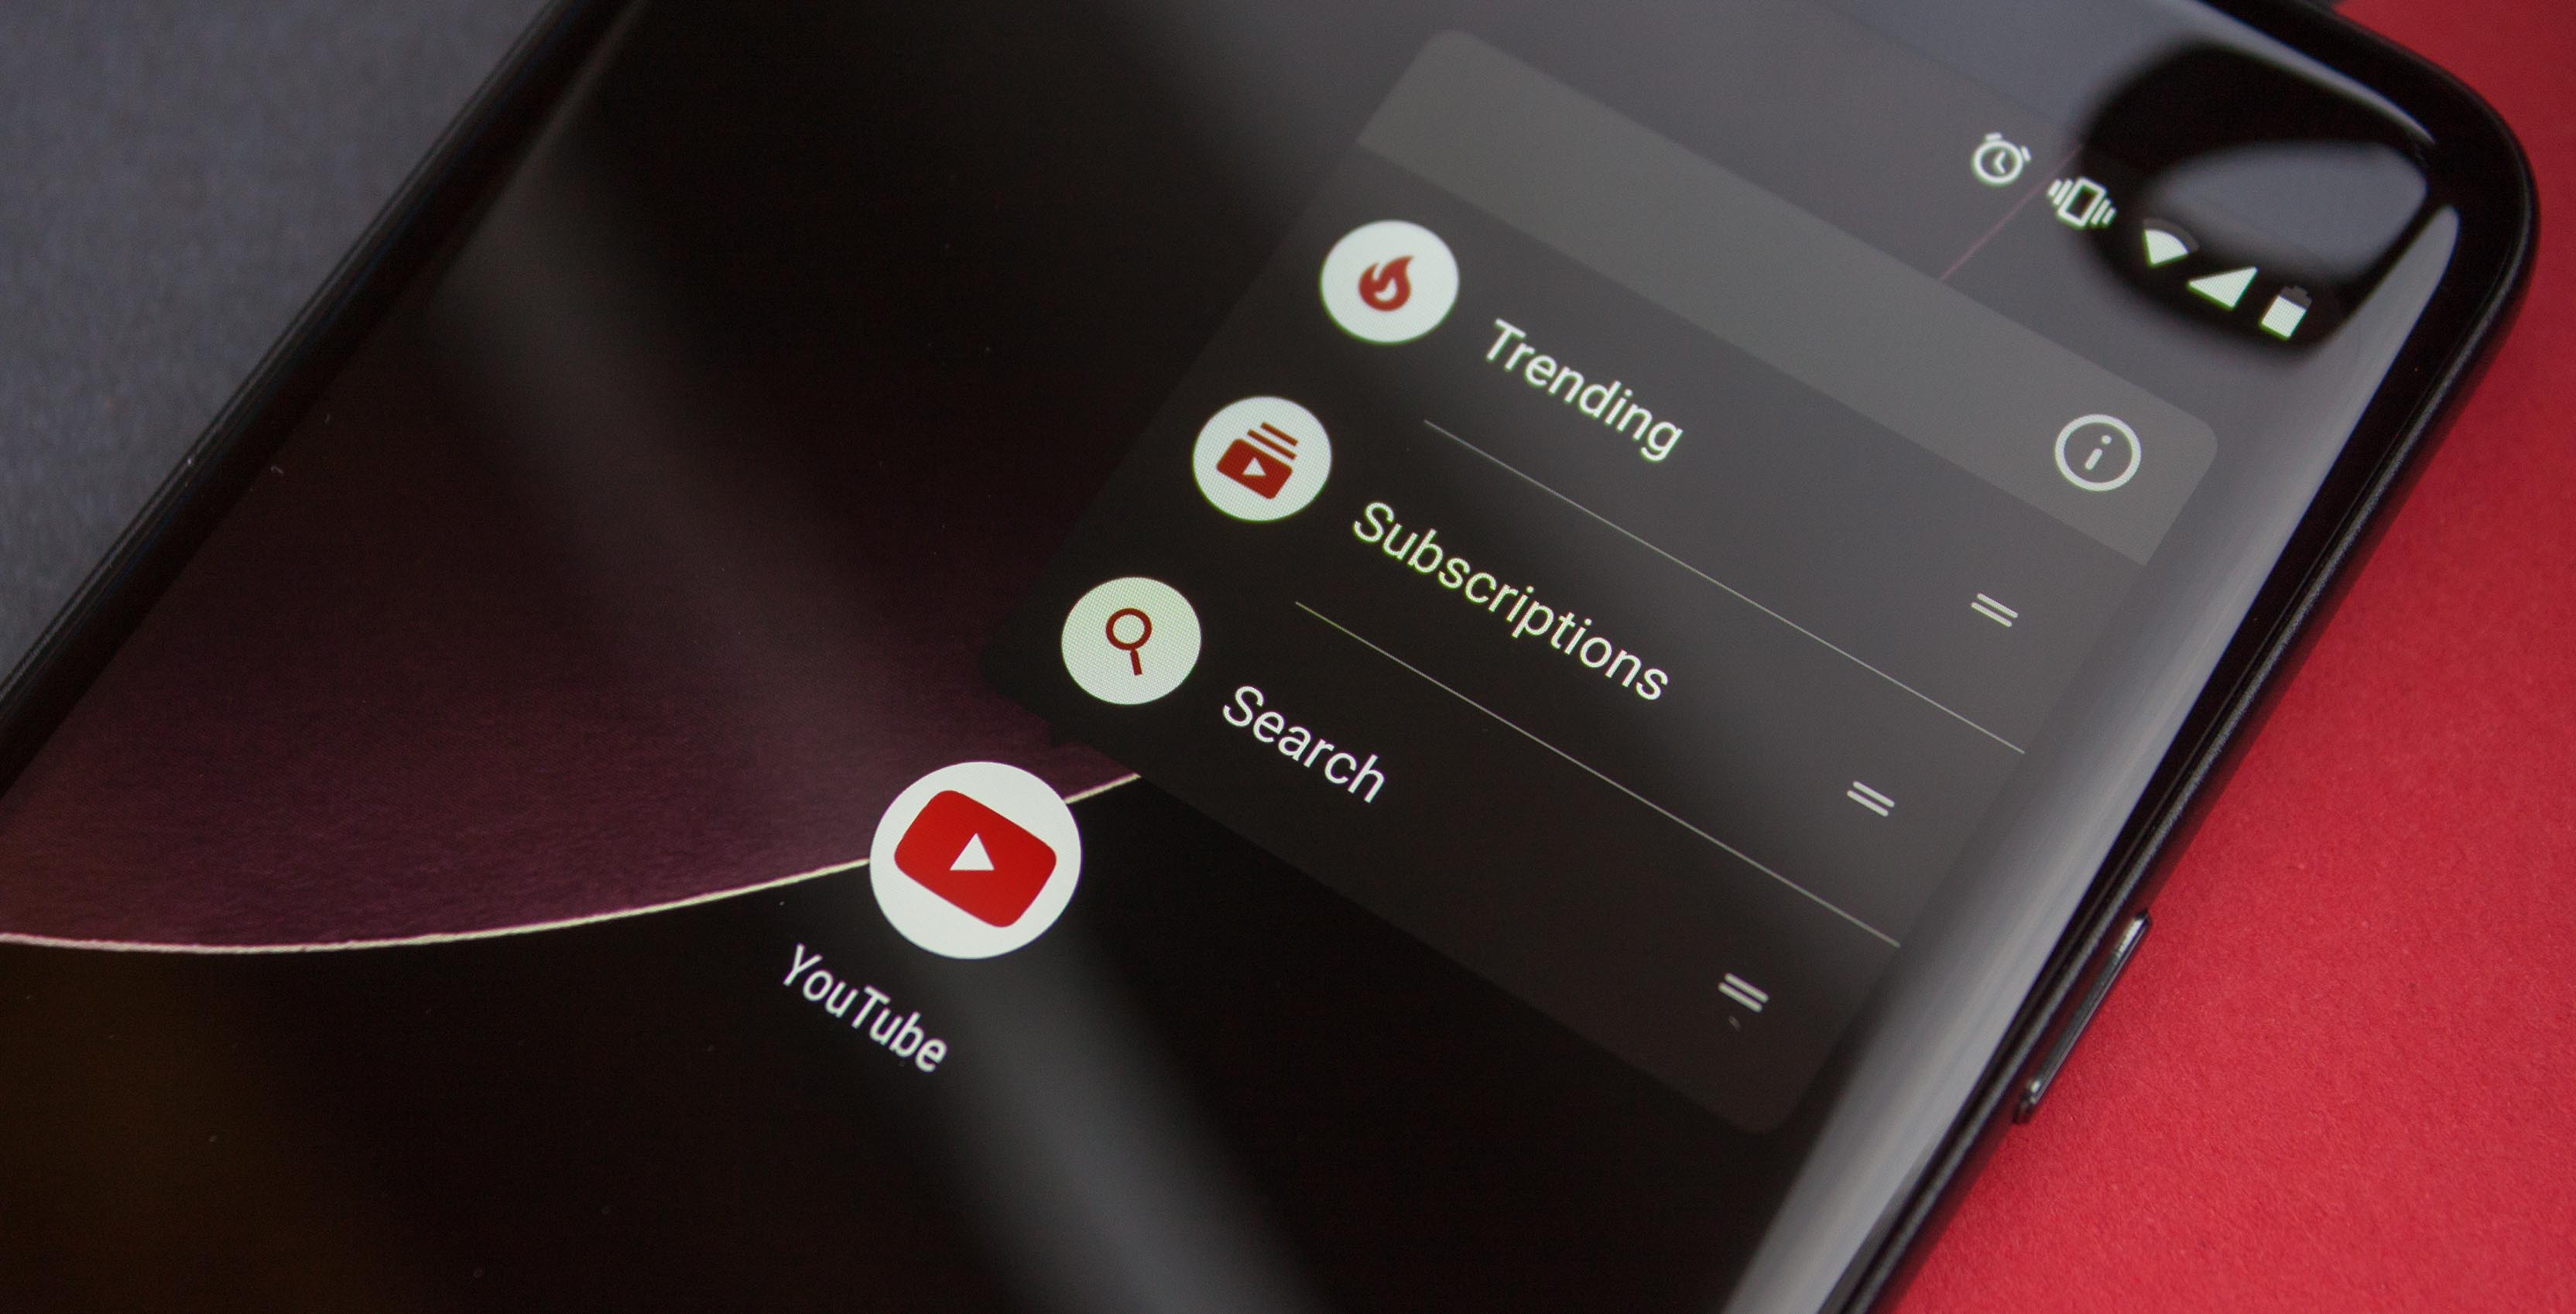 YouTube app icon on Android